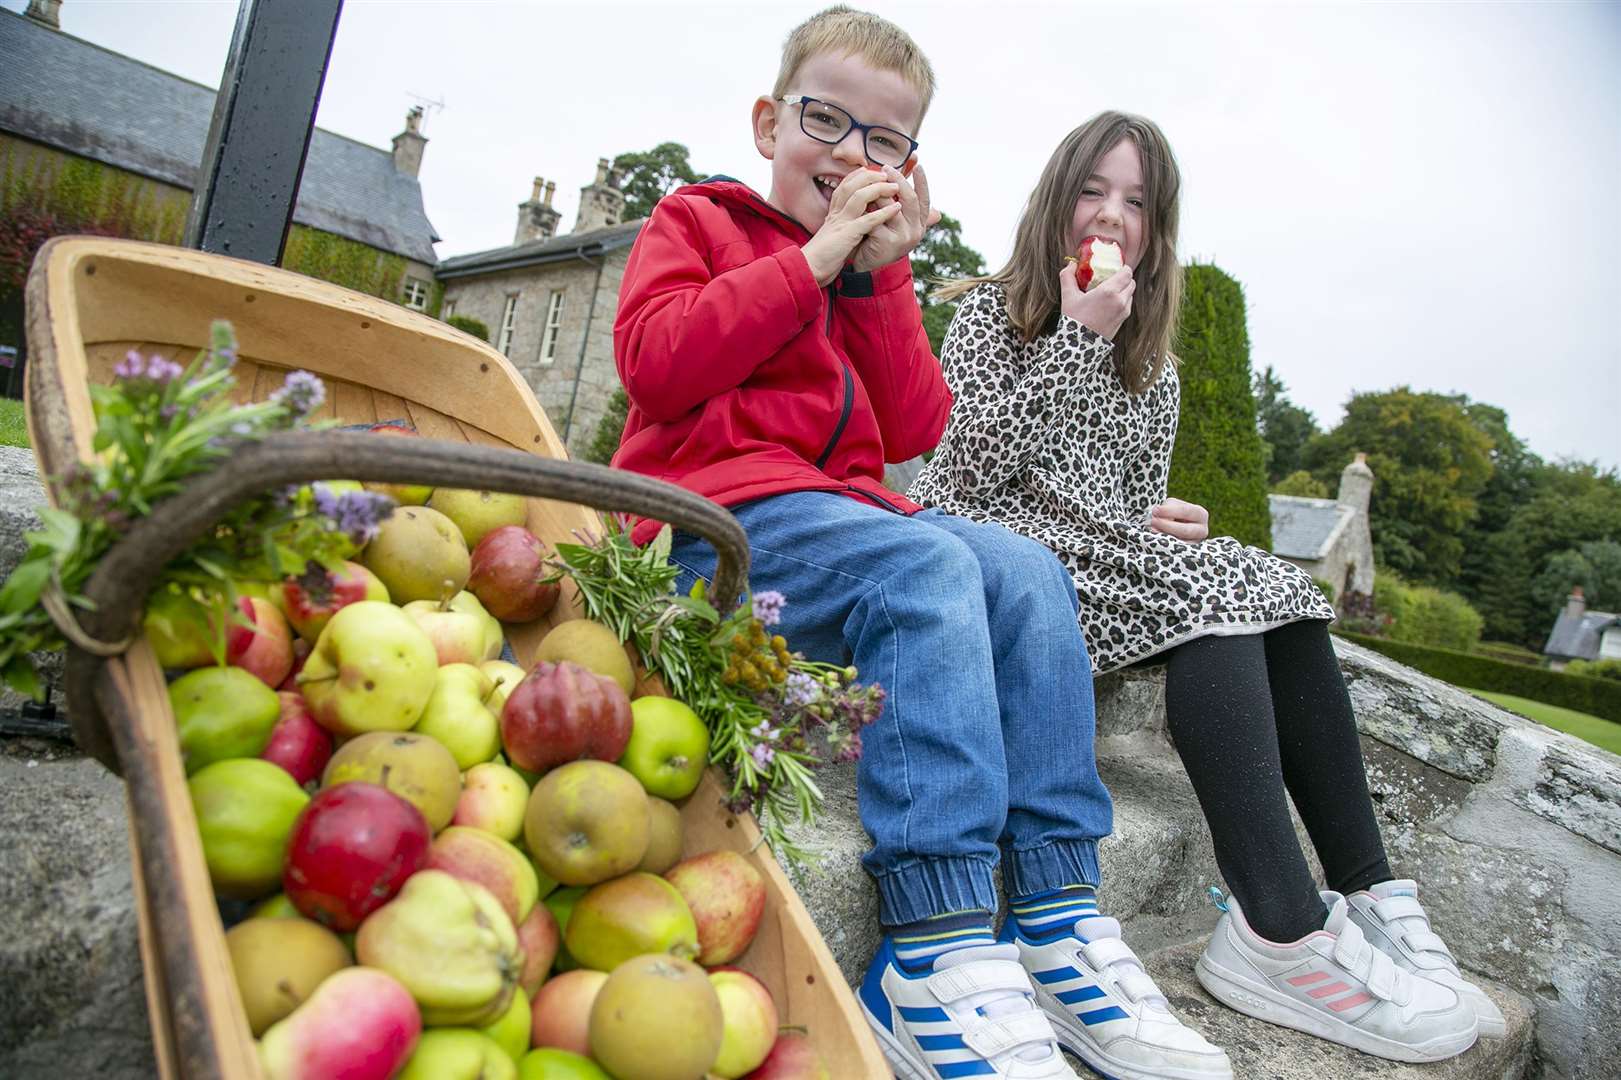 Enjoying their apples are Cameron (5) and Jessica Hawkins (7). Picture: Rory Raitt